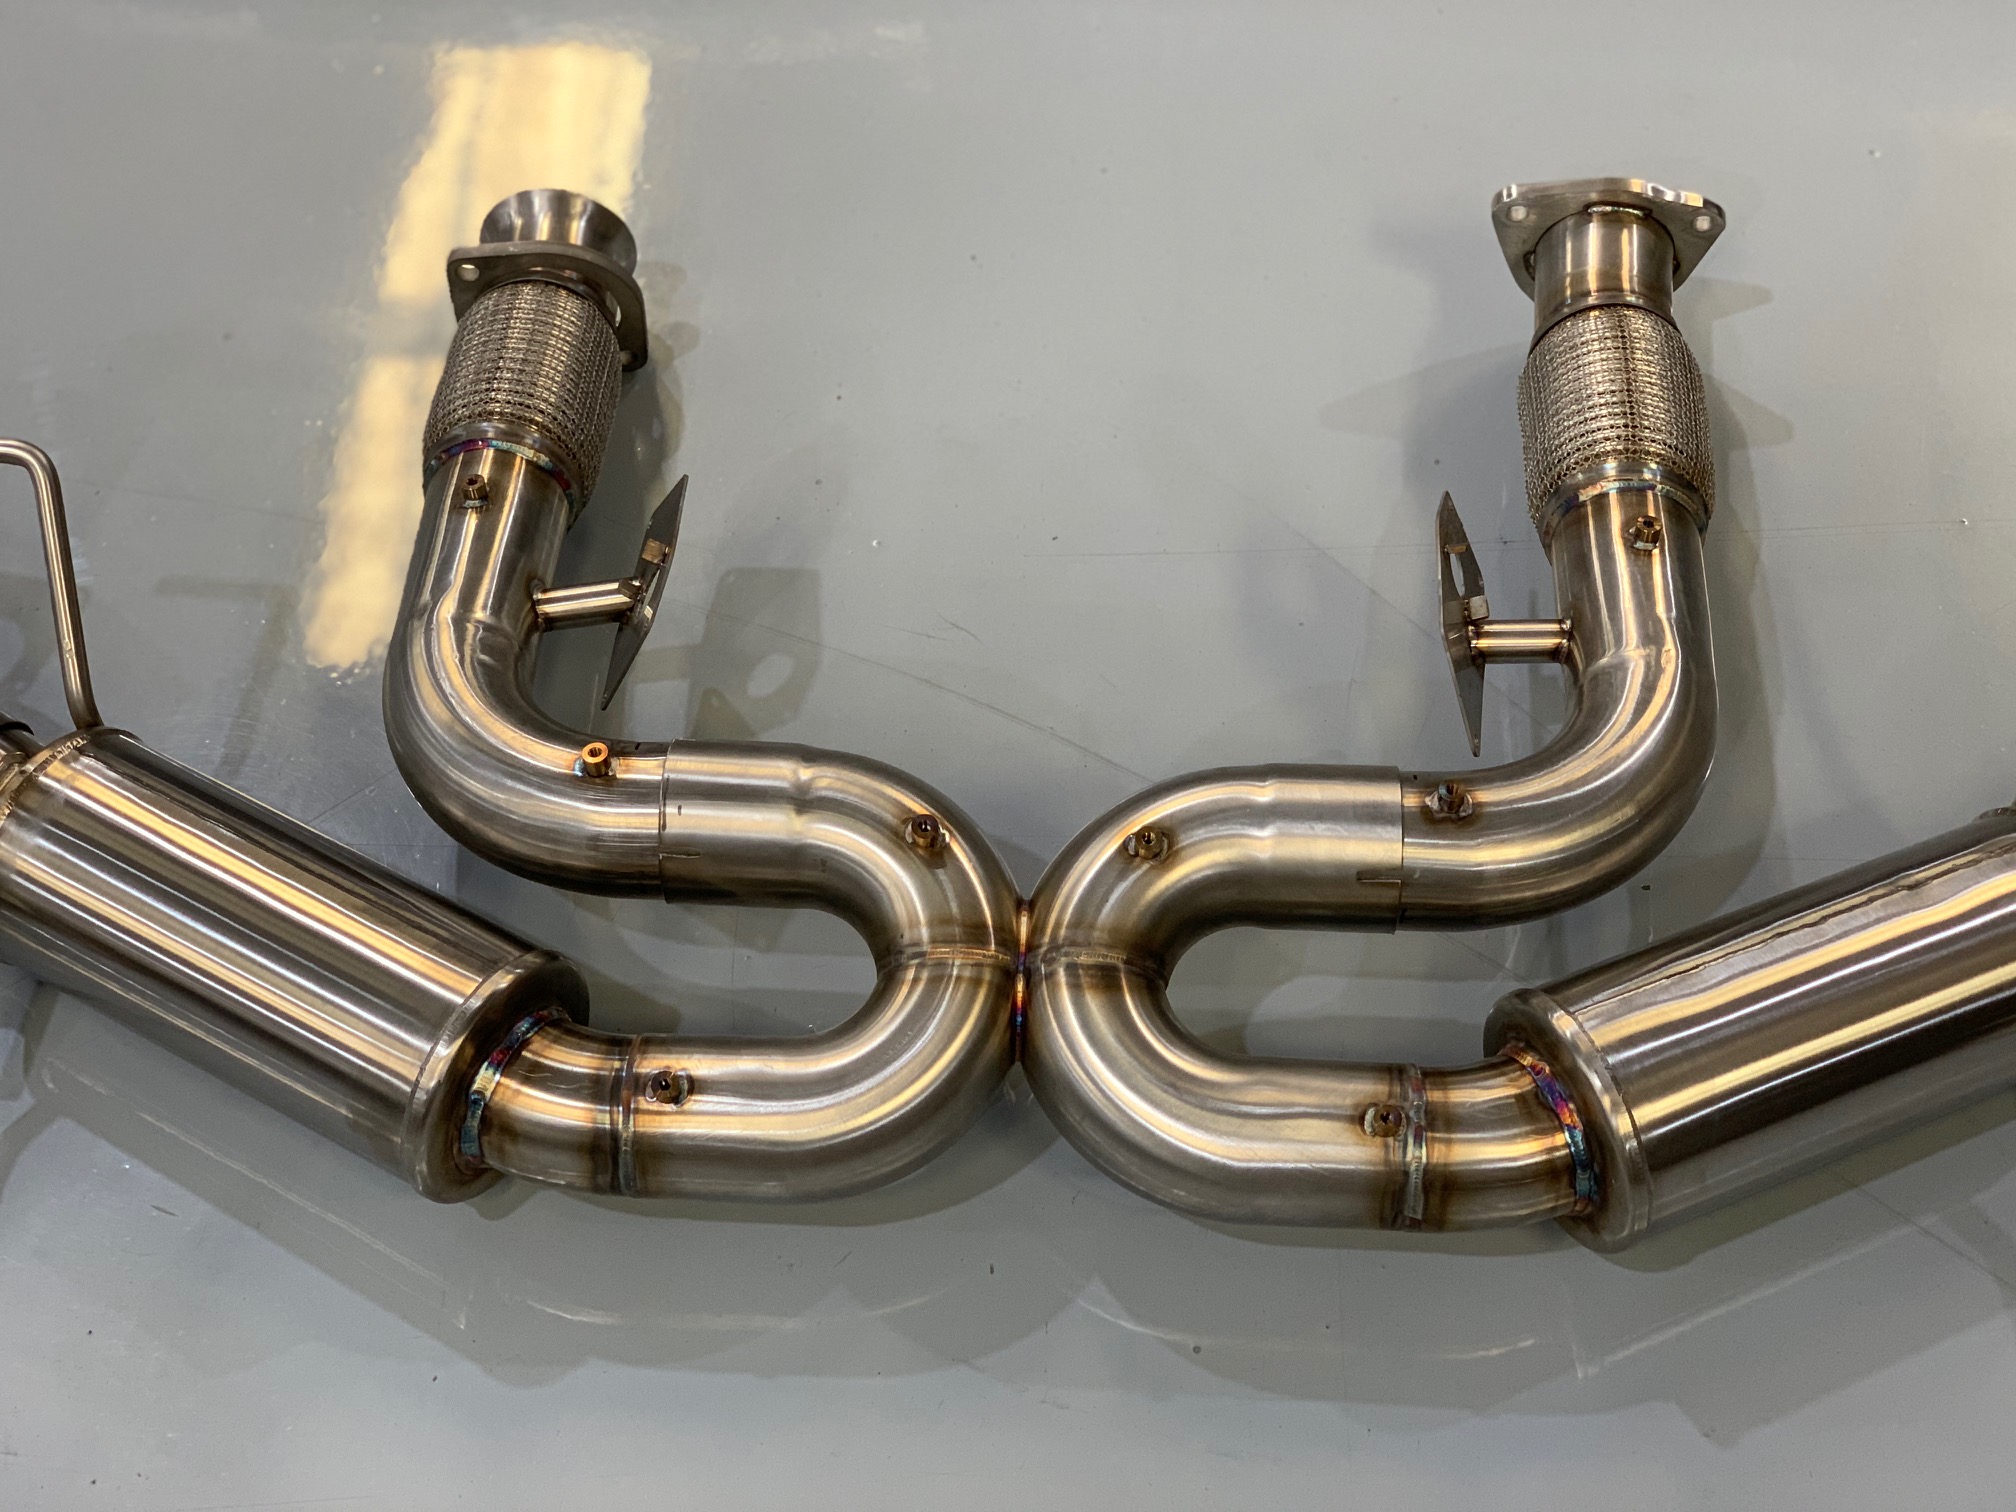 C8 Corvette Stingray Bullet Exhaust System #FCOR-0715 4.5" Stainless Double Wall Tips NO AFM VALVE